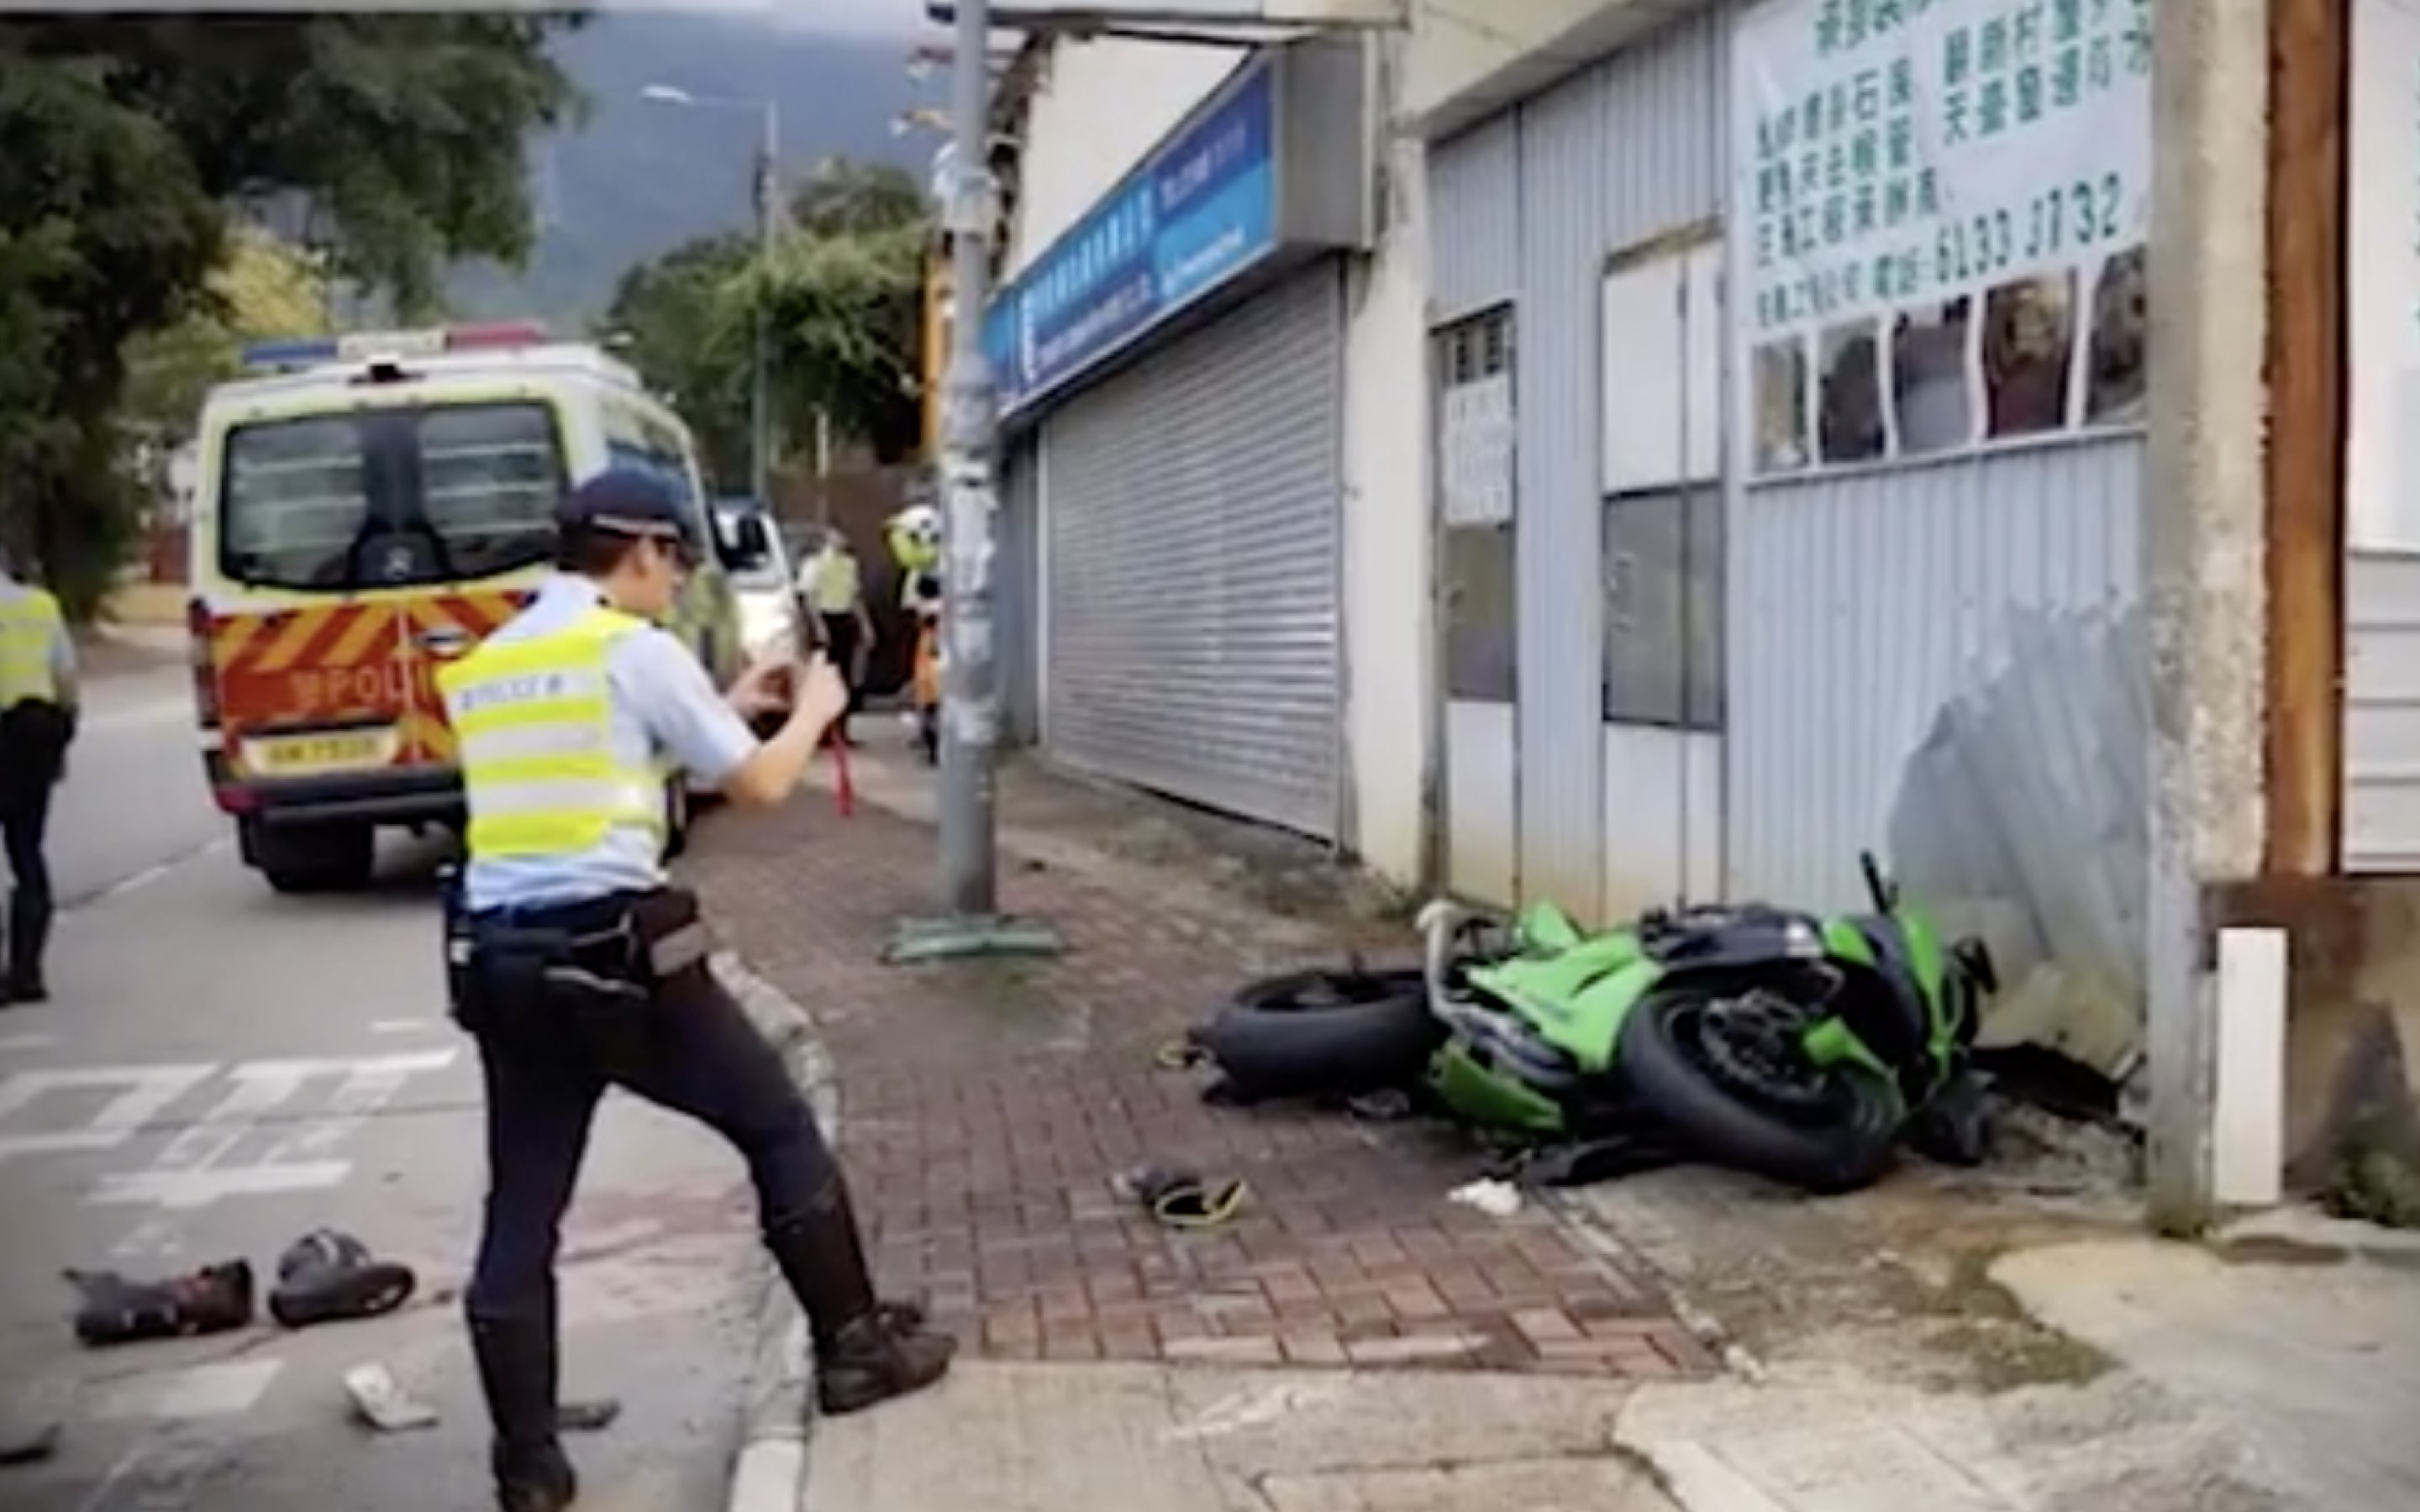 Police at the site of a motorcycle crash. Screengrab via Apple Daily video.